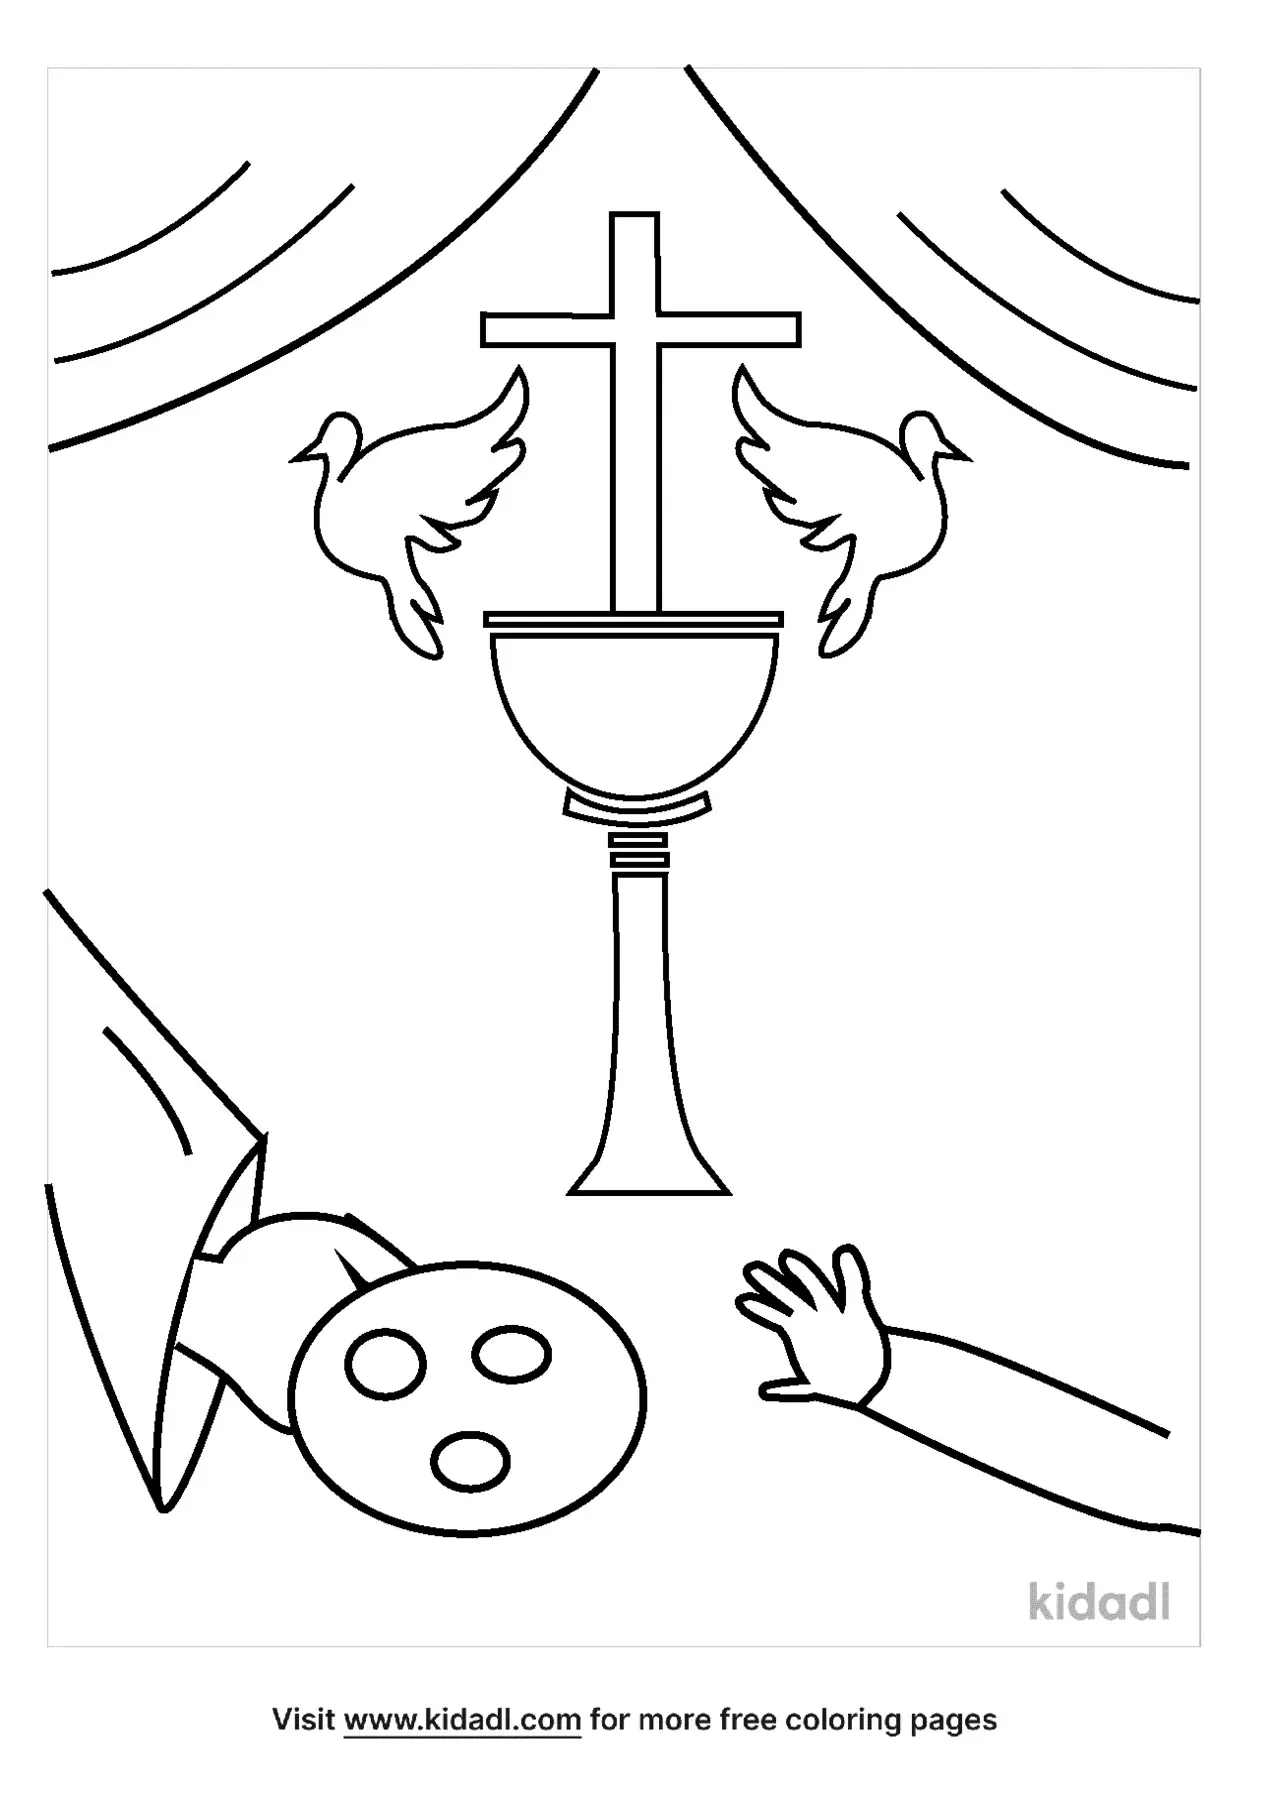 Free First Communion Coloring Page | Coloring Page Printables | Kidadl